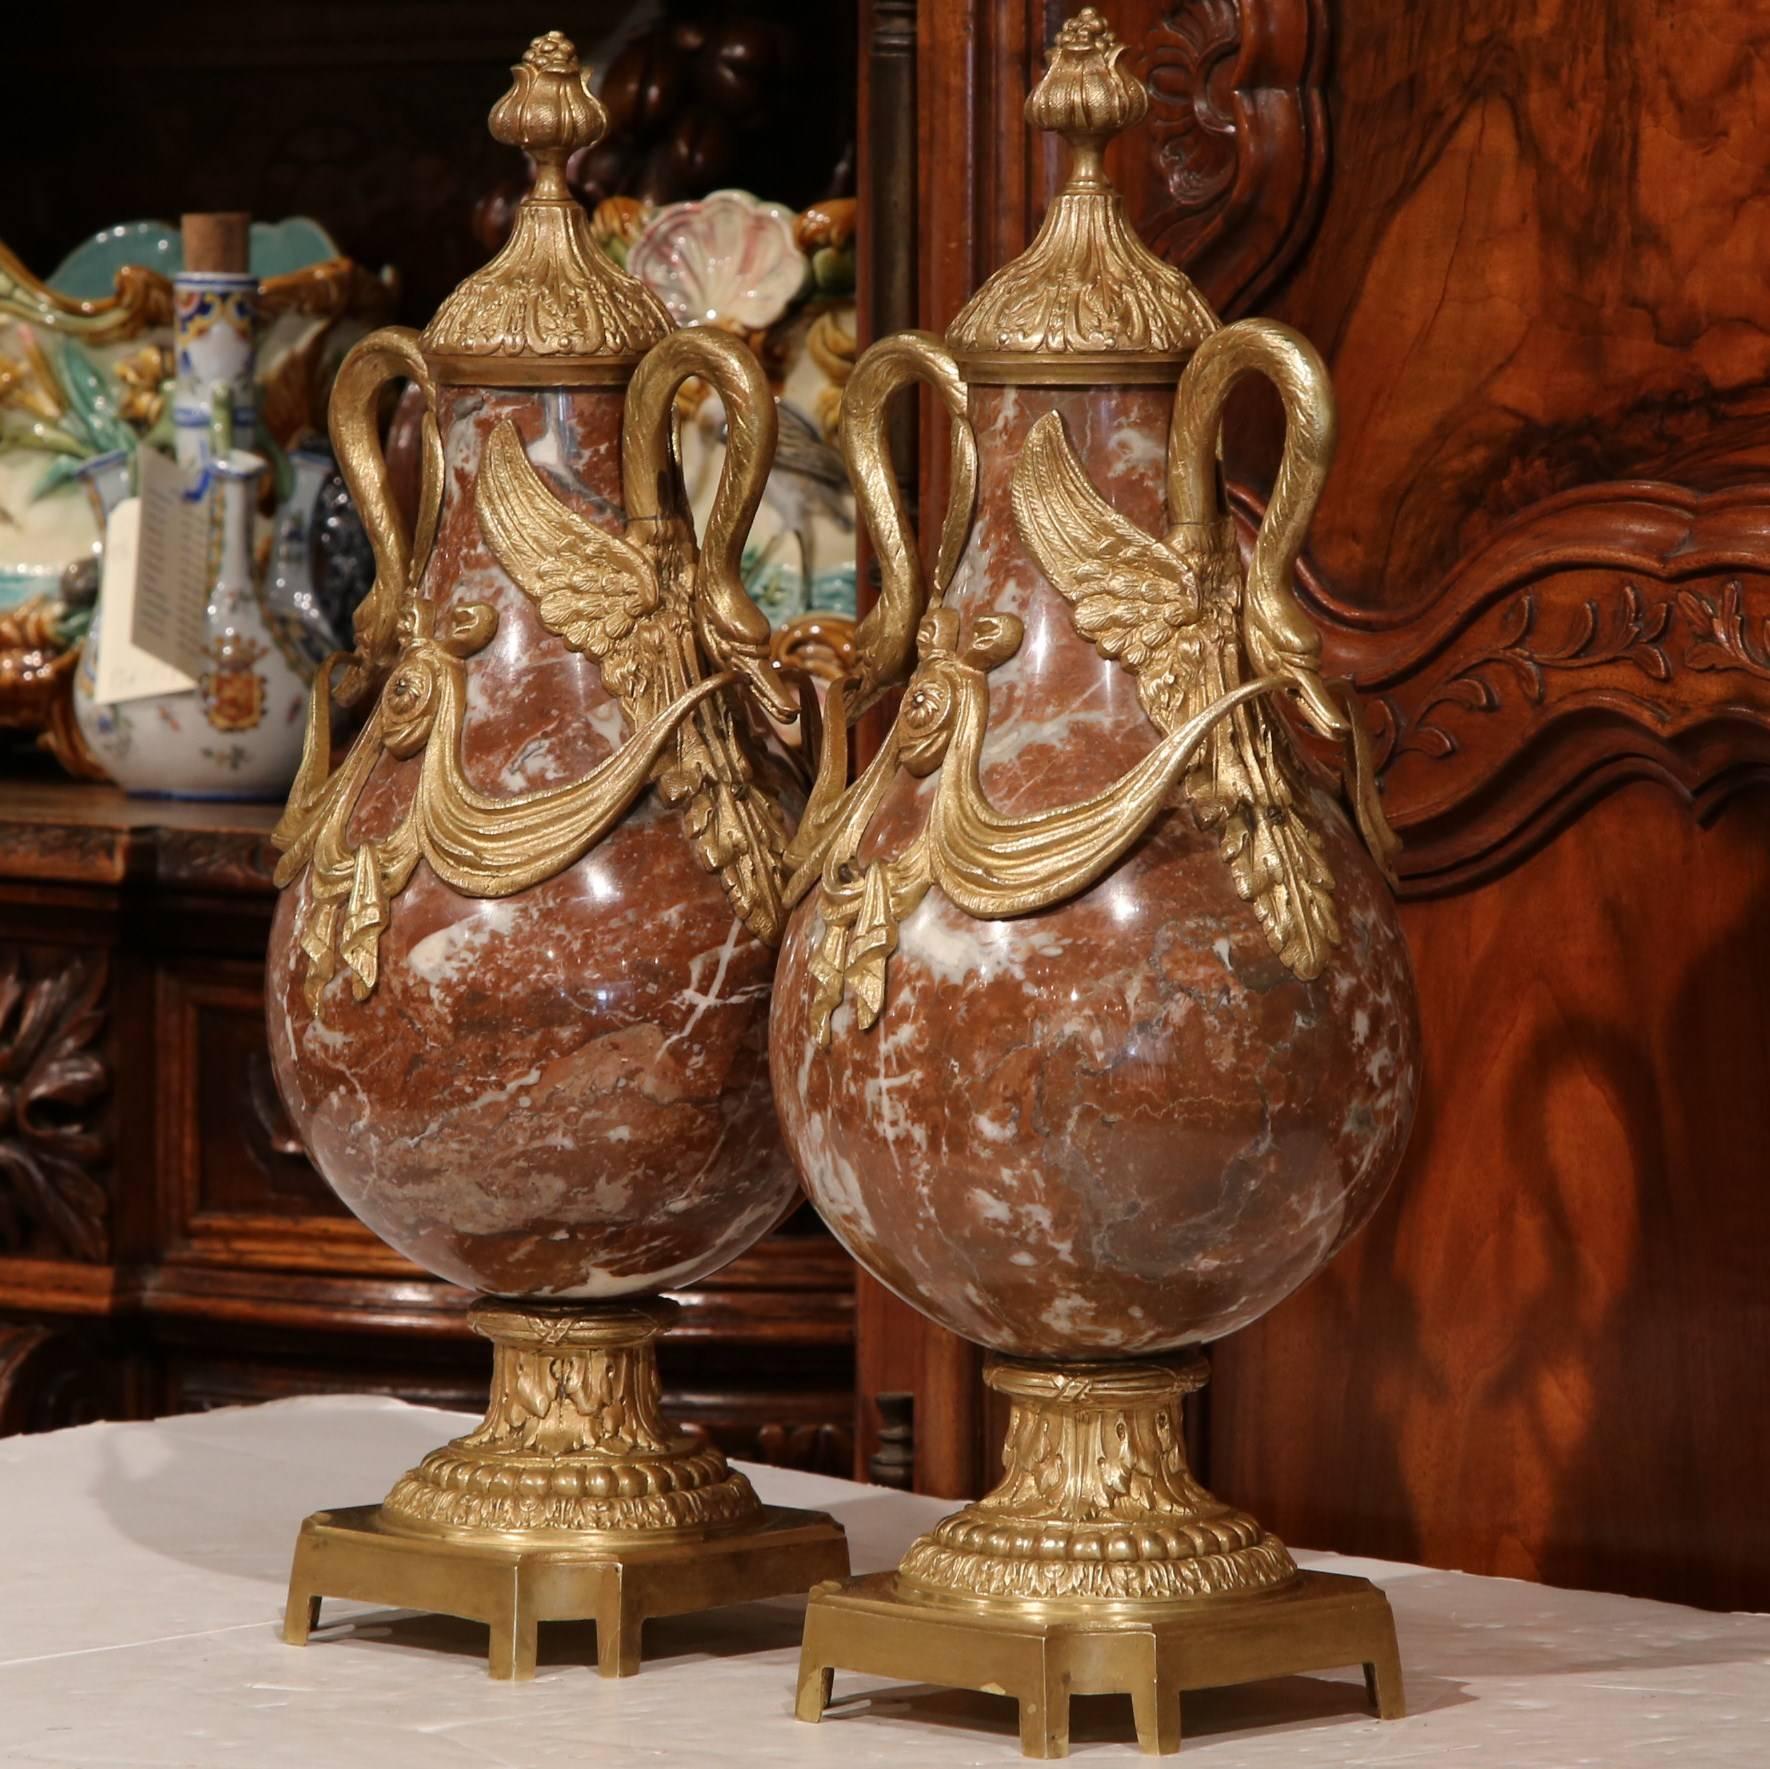 This fine pair of marble and bronze cassolettes was created in France, circa 1870. The unique, beautiful urns are decorated with ornate bronze decorations that include swan head handles and dramatic garlands. The pieces have a red marble and white